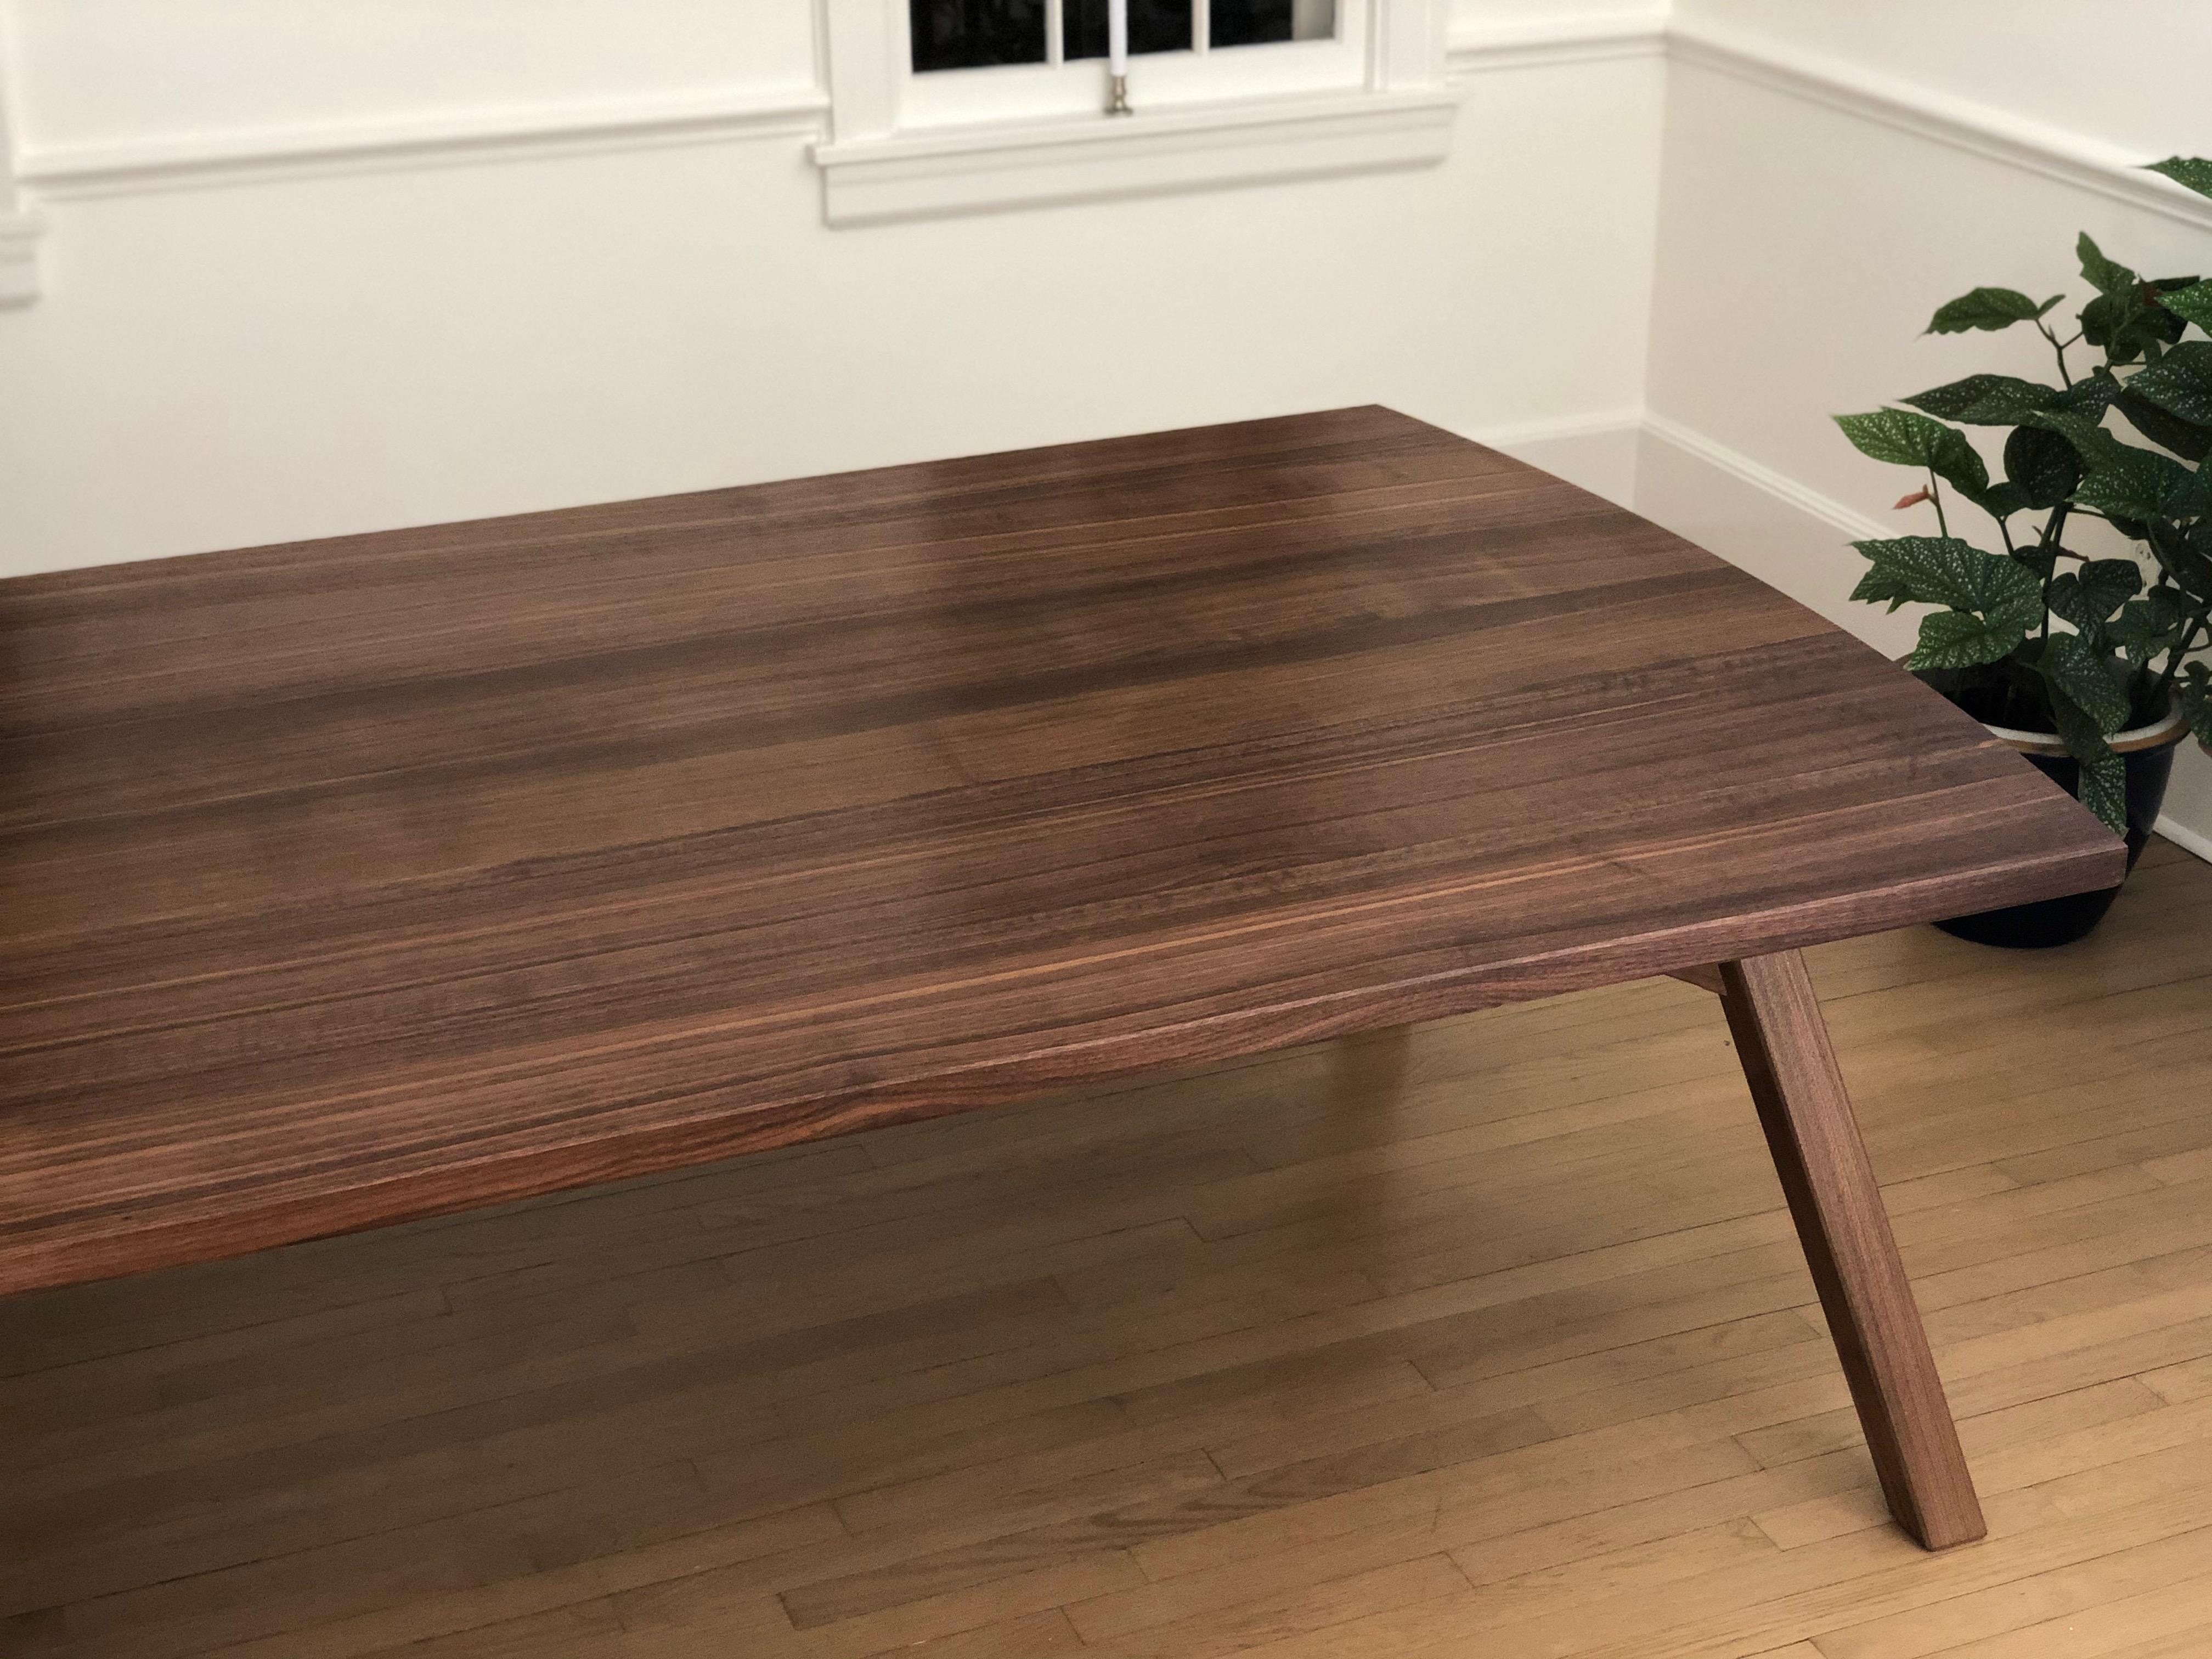 This dining table takes inspiration from the traditional Japanese bell tower in its use of a splayed leg structure that appears to feature square section legs. Upon closer inspection one realizes that the legs are a parallelogram shape, unique to